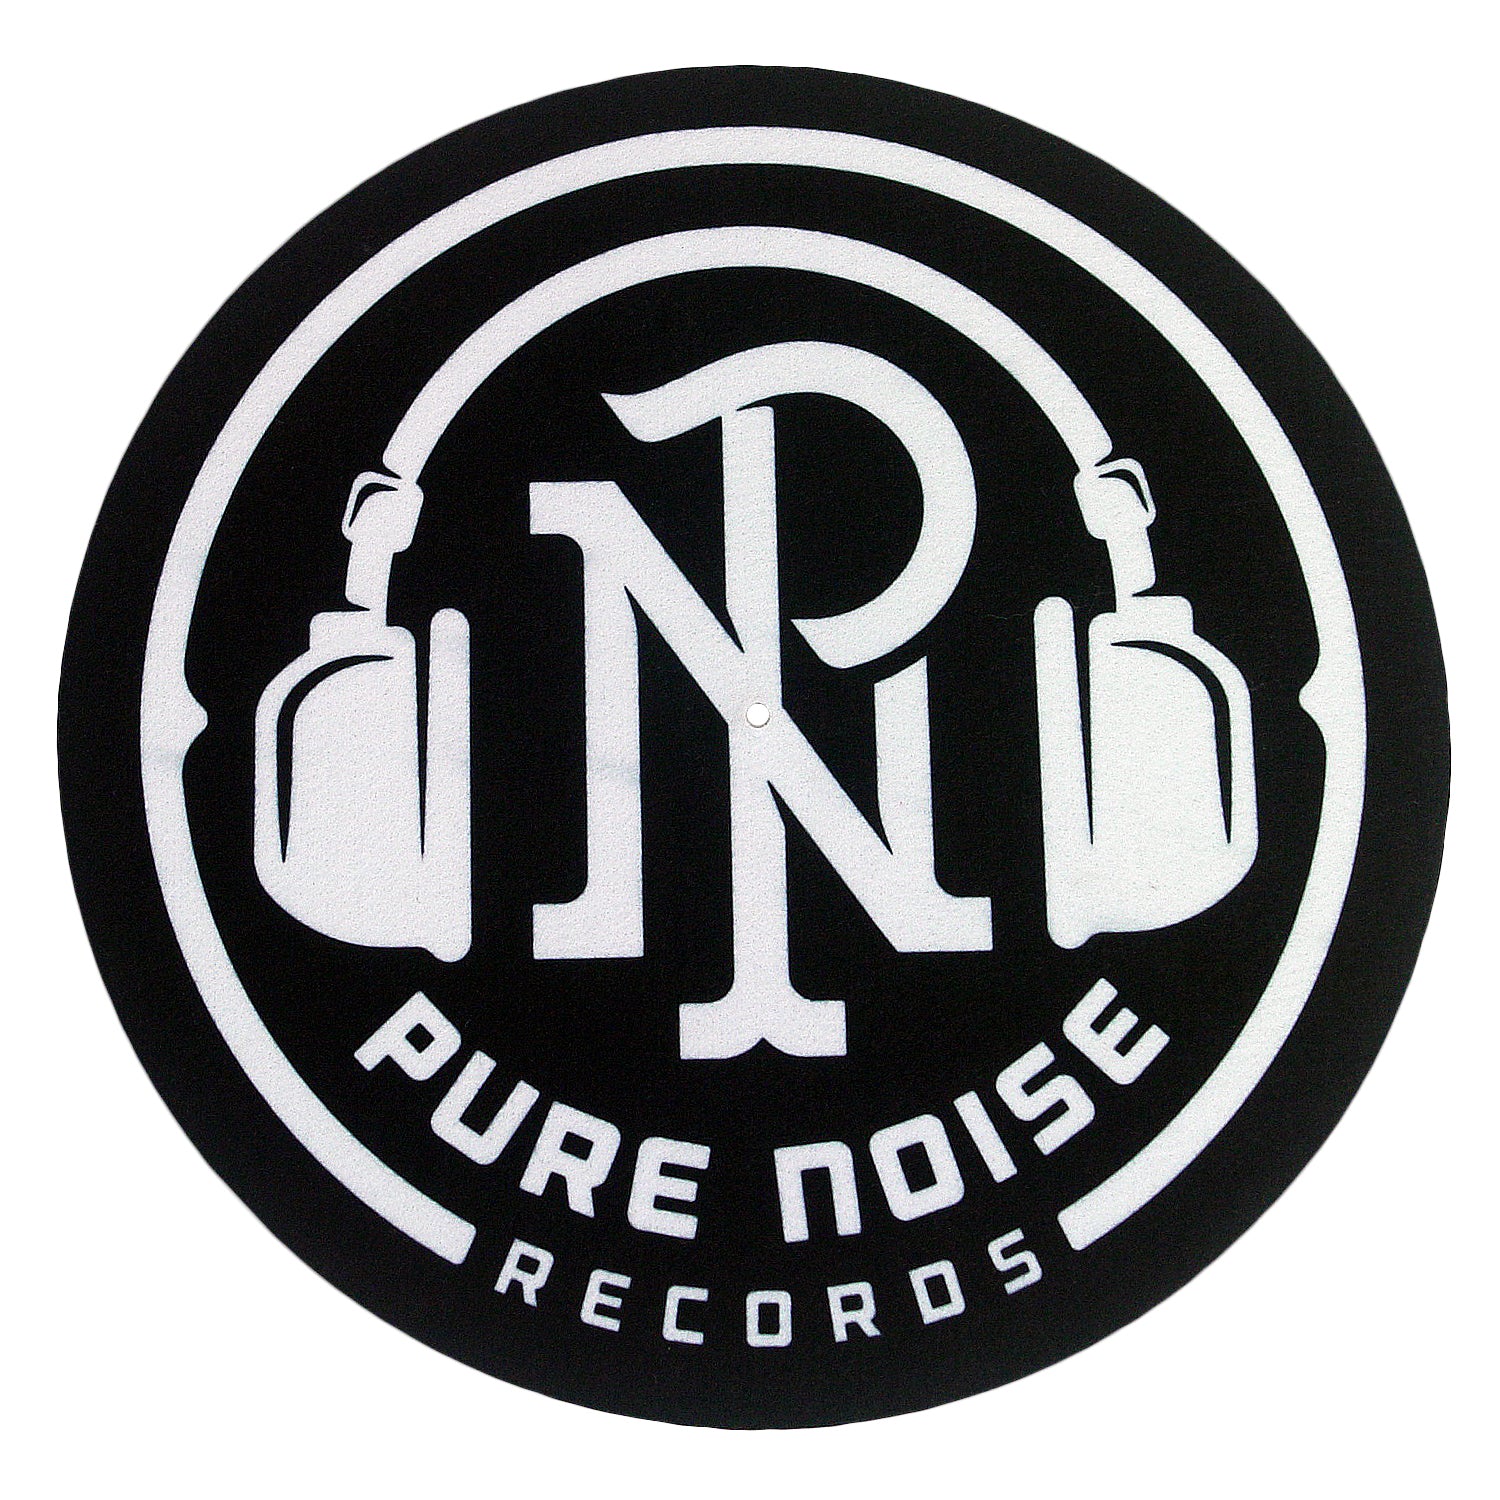 Dolby B Noise Reduction(29) logo, Vector Logo of Dolby B Noise  Reduction(29) brand free download (eps, ai, png, cdr) formats